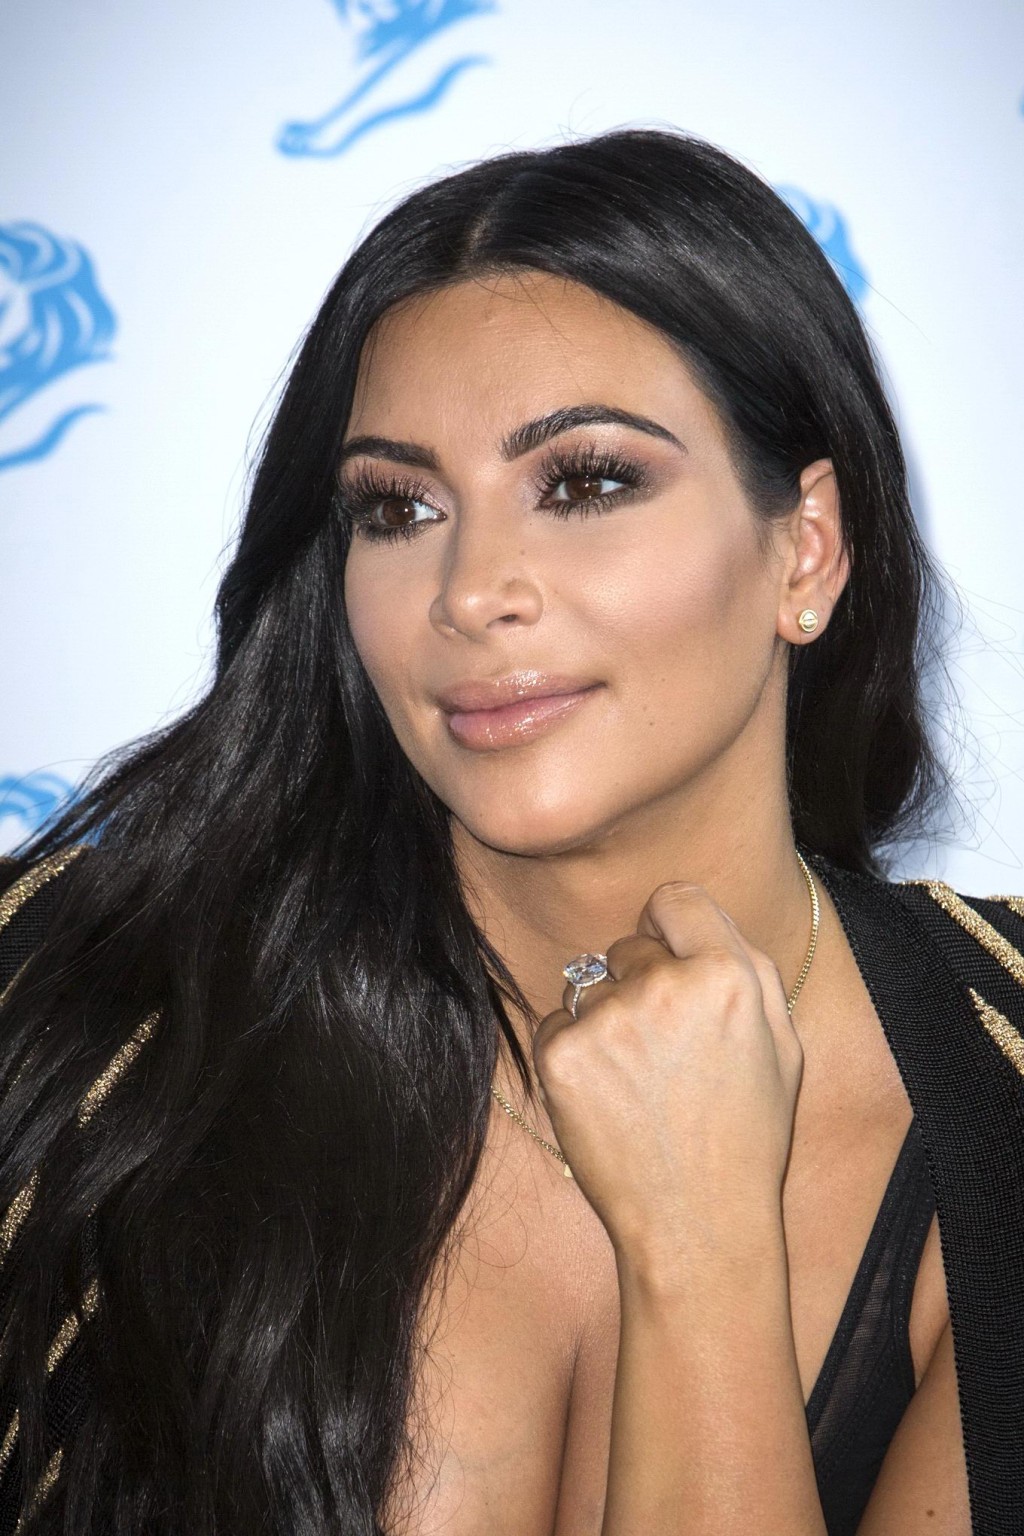 Kim Kardashian showing huge cleavage at the Cannes Lions event #75160350